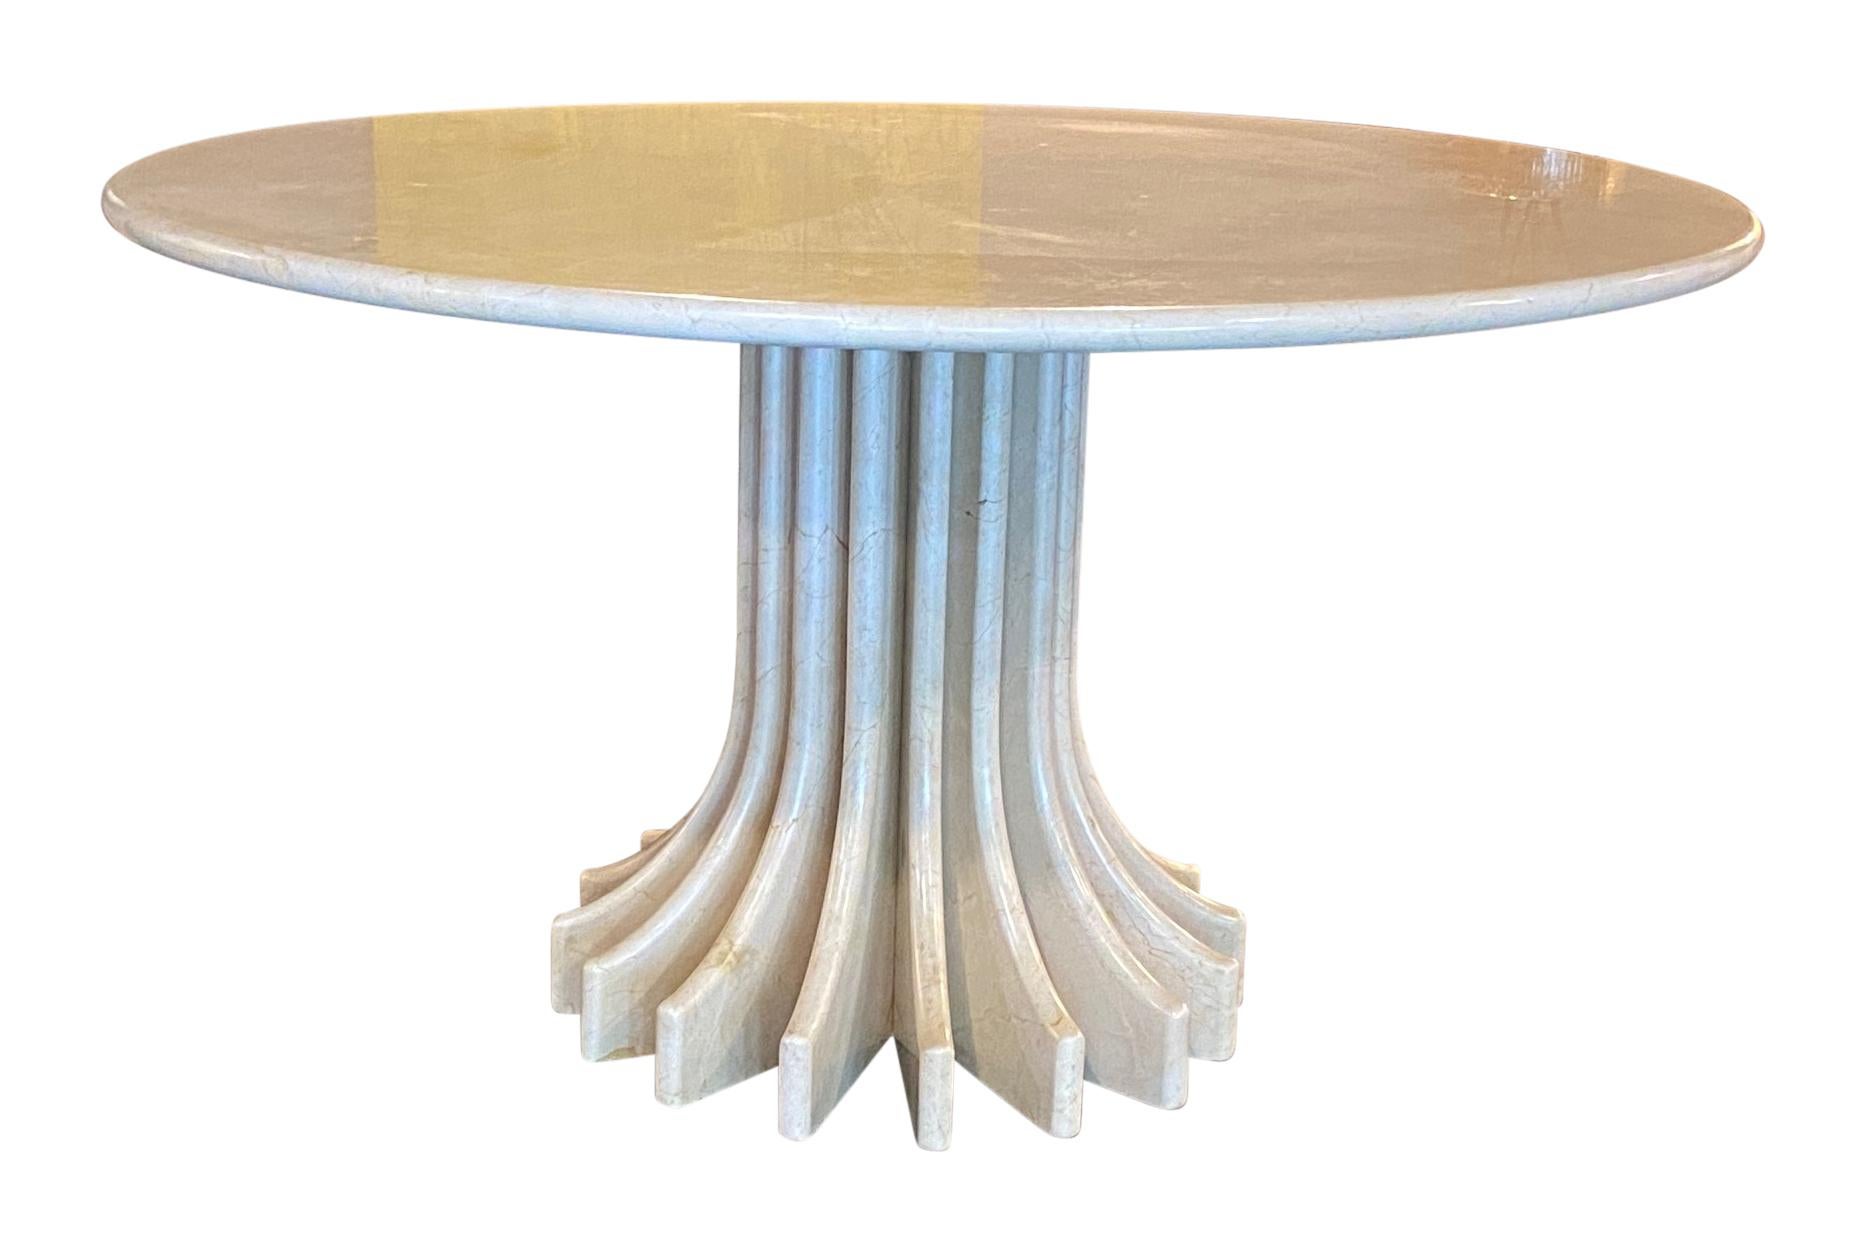 Italian Mid-Century Modern geometric beige marble dining table, made in the 1970s, Carlo Scarpa style.